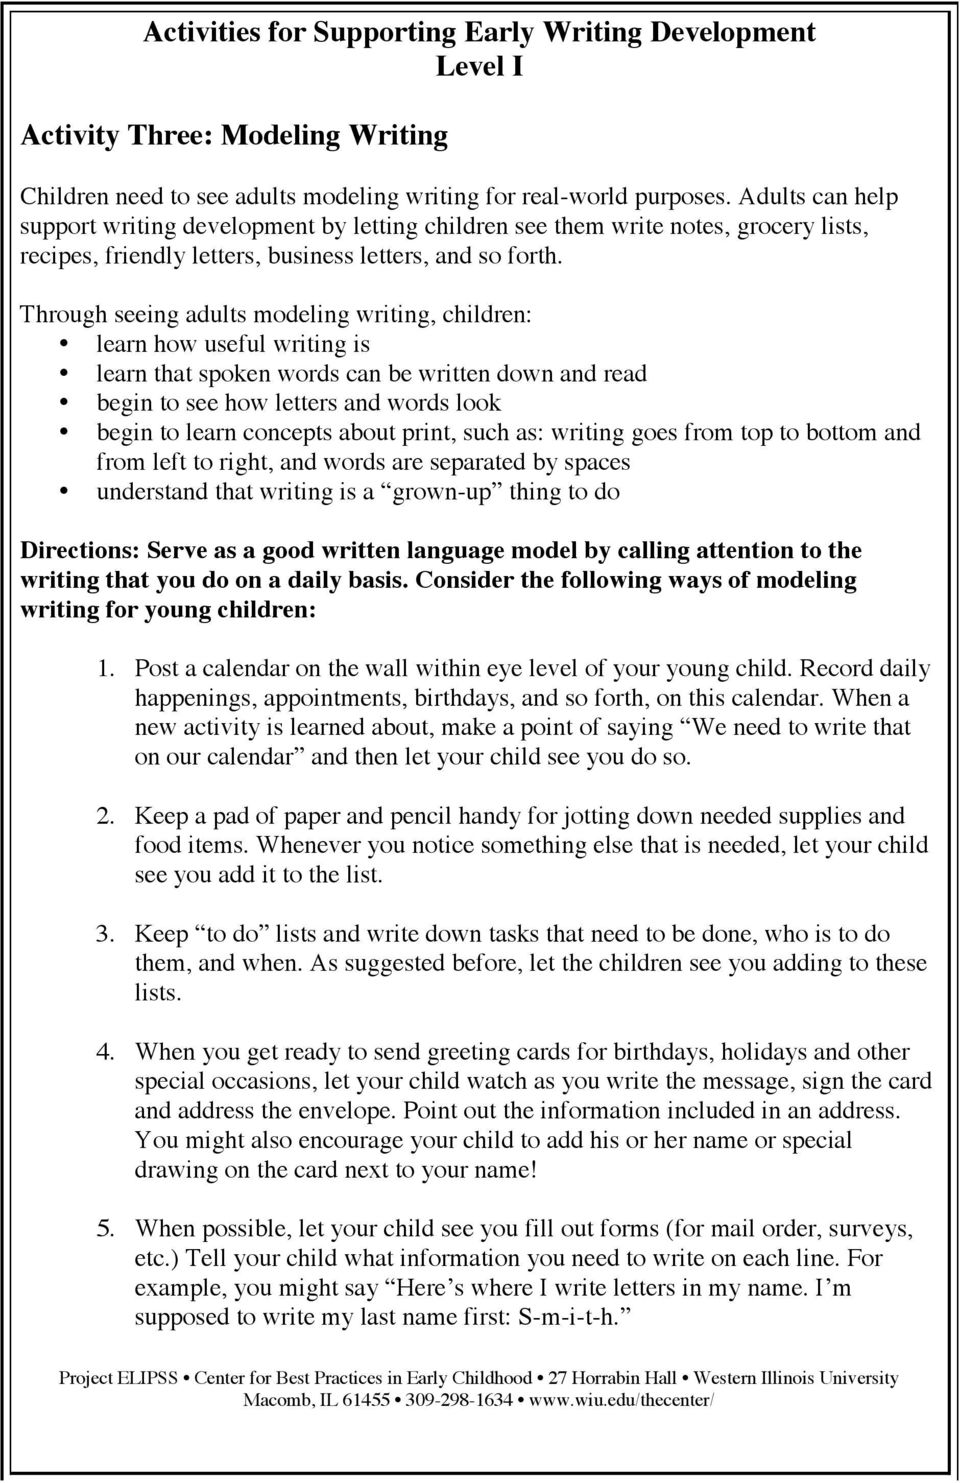 Through seeing adults modeling writing, children: learn how useful writing is learn that spoken words can be written down and read begin to see how letters and words look begin to learn concepts